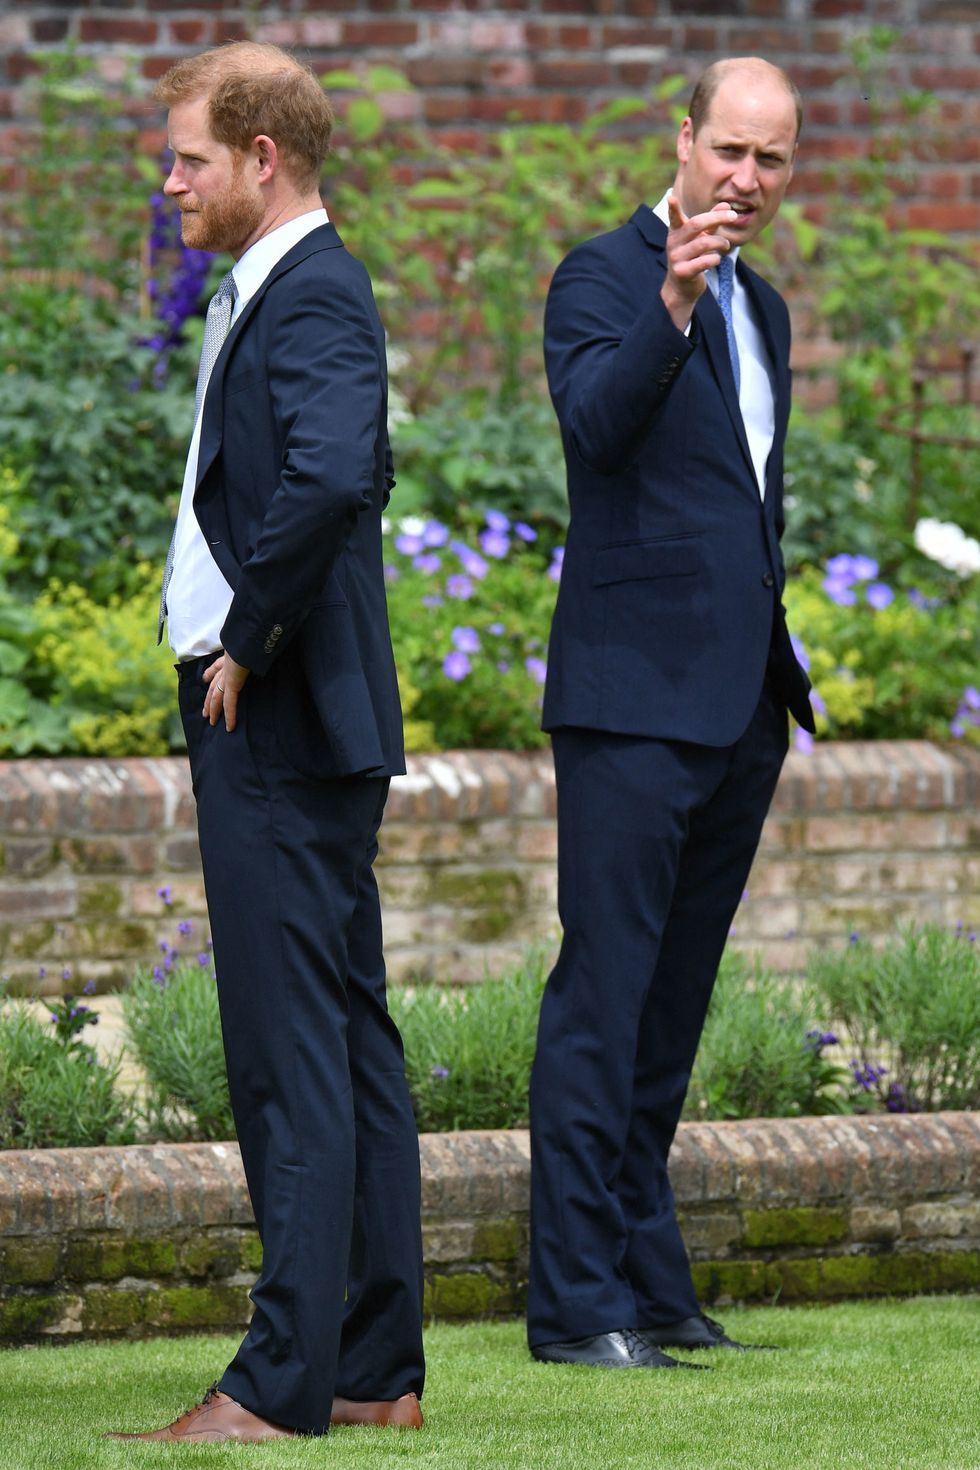 topshot   britains prince harry, duke of sussex l and britains prince william, duke of cambridge attend the unveiling of a statue of their mother, princess diana at the sunken garden in kensington palace, london on july 1, 2021, which would have been her 60th birthday   princes william and harry set aside their differences on thursday to unveil a new statue of their mother, princess diana, on what would have been her 60th birthday photo by dominic lipinski  pool  afp photo by dominic lipinskipoolafp via getty images